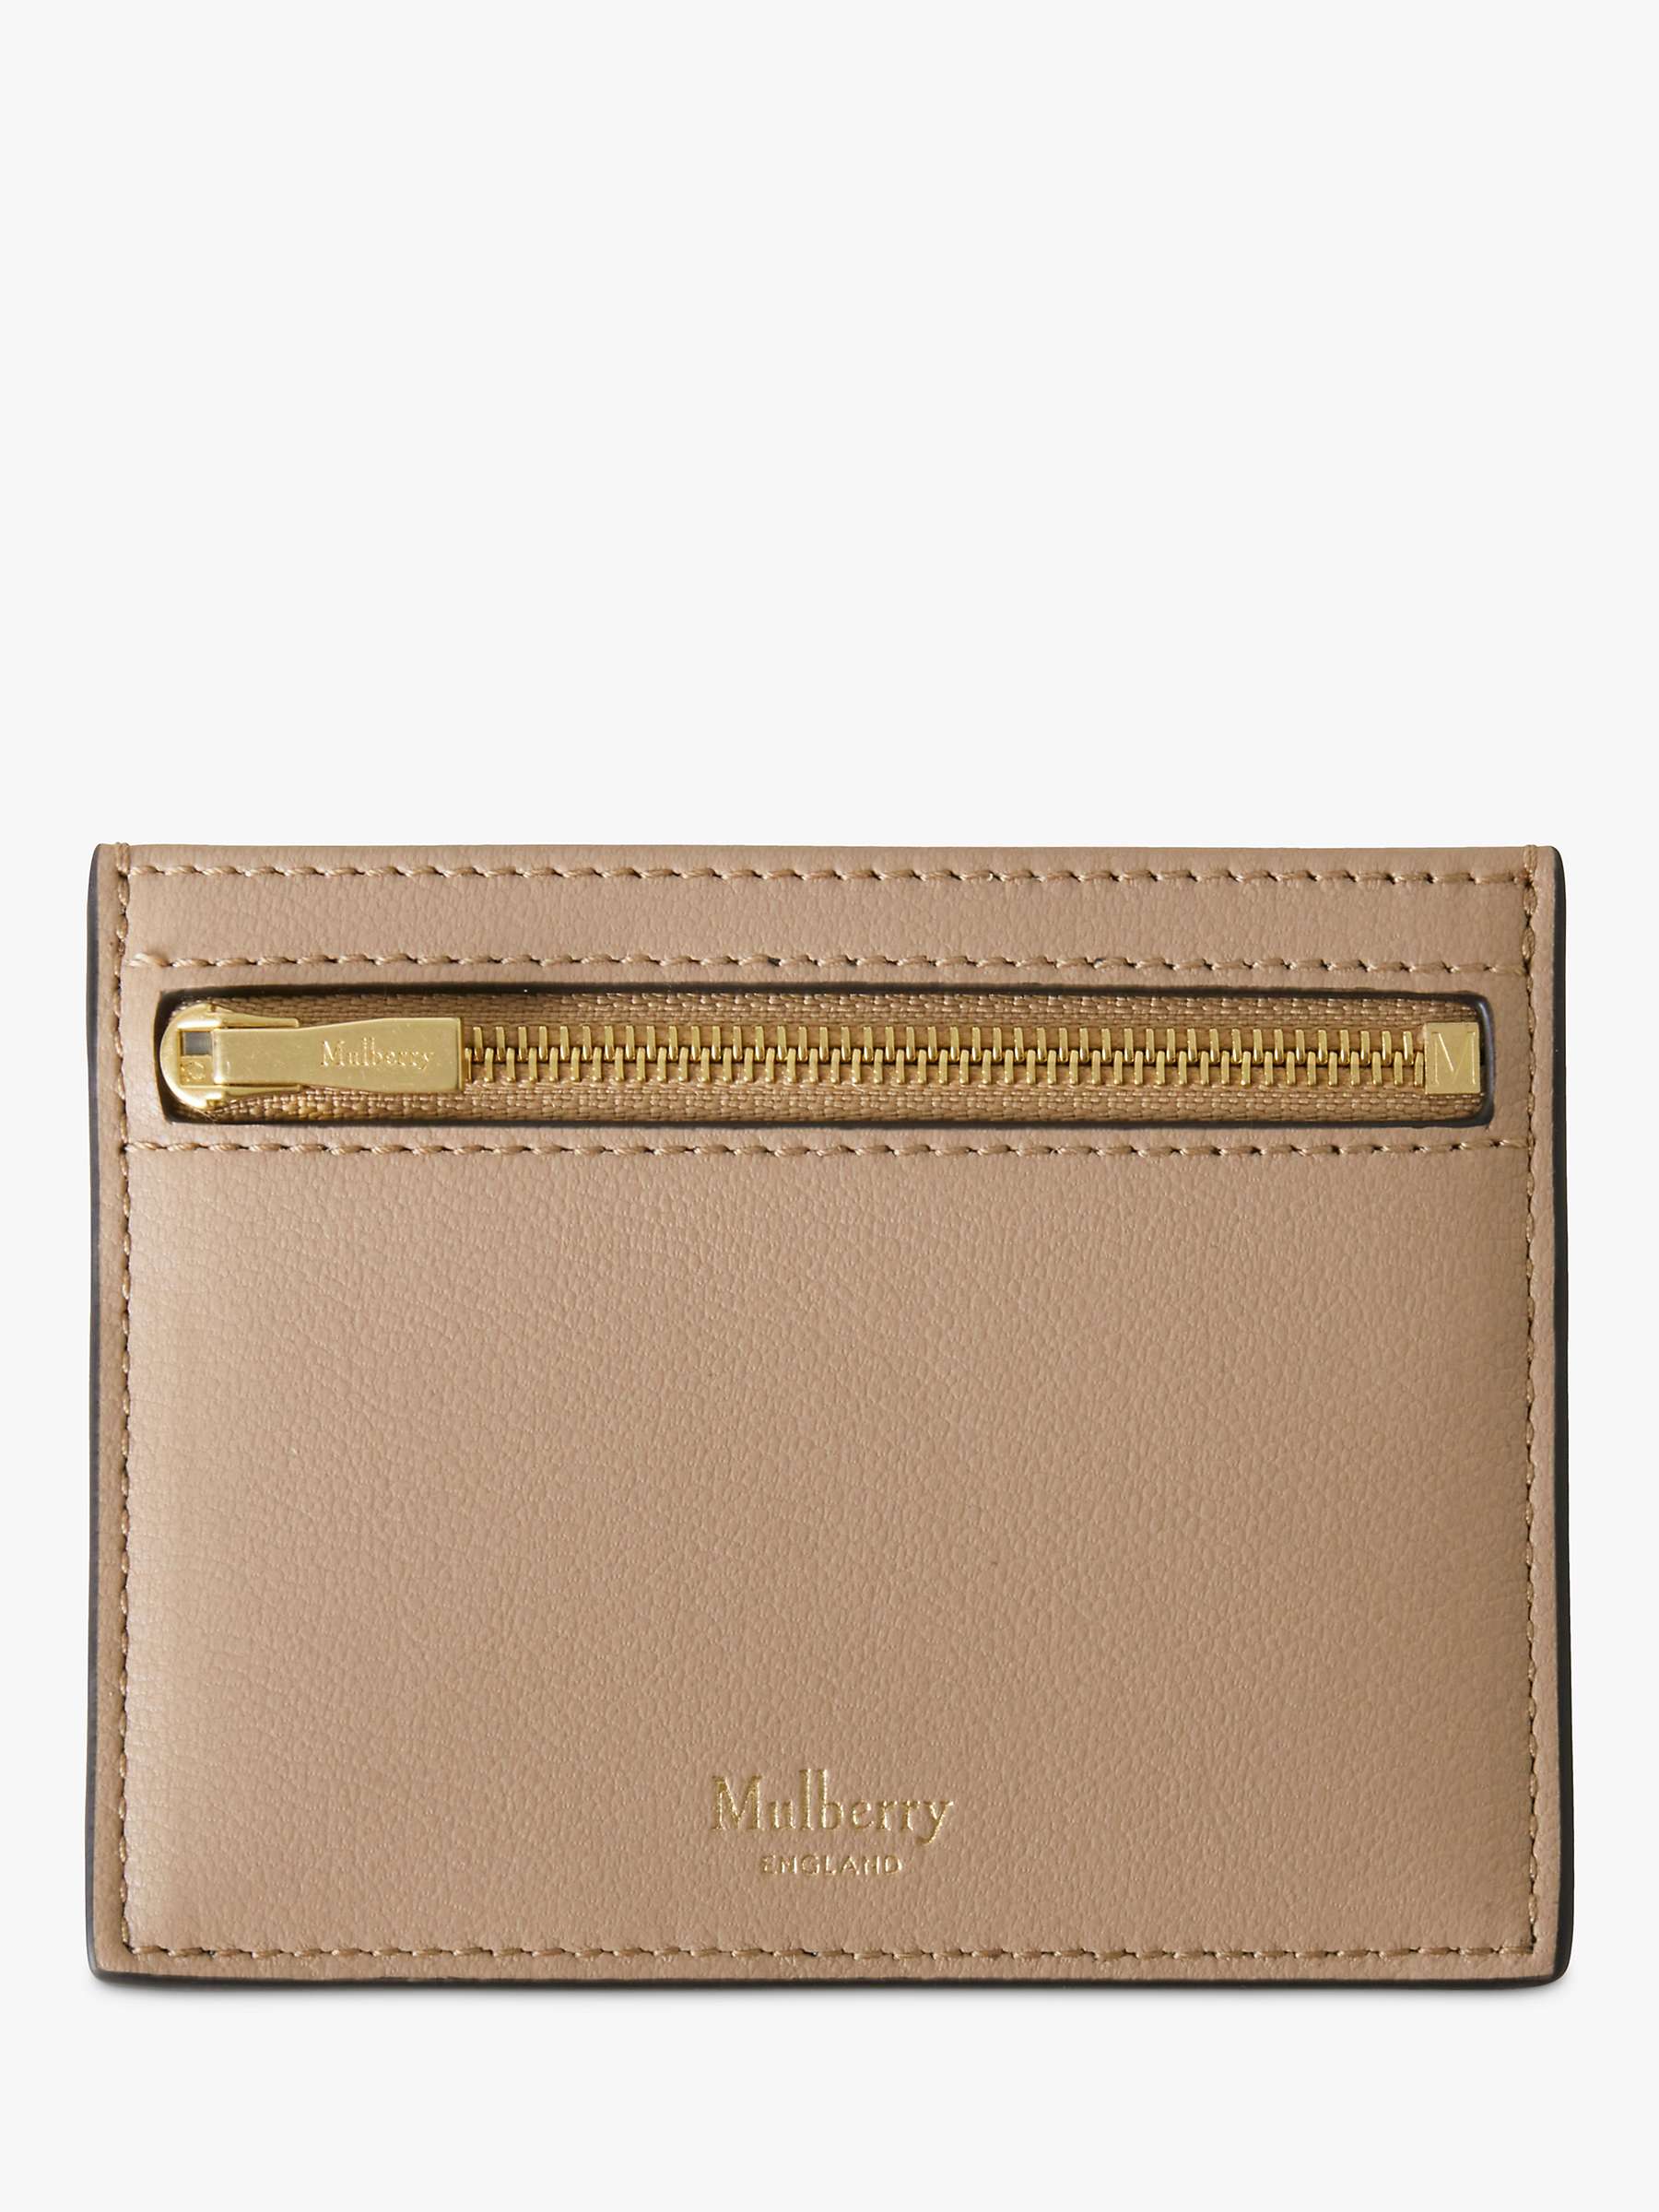 Buy Mulberry Micro Classic Grain Leather Zipped Credit Card Slip Online at johnlewis.com